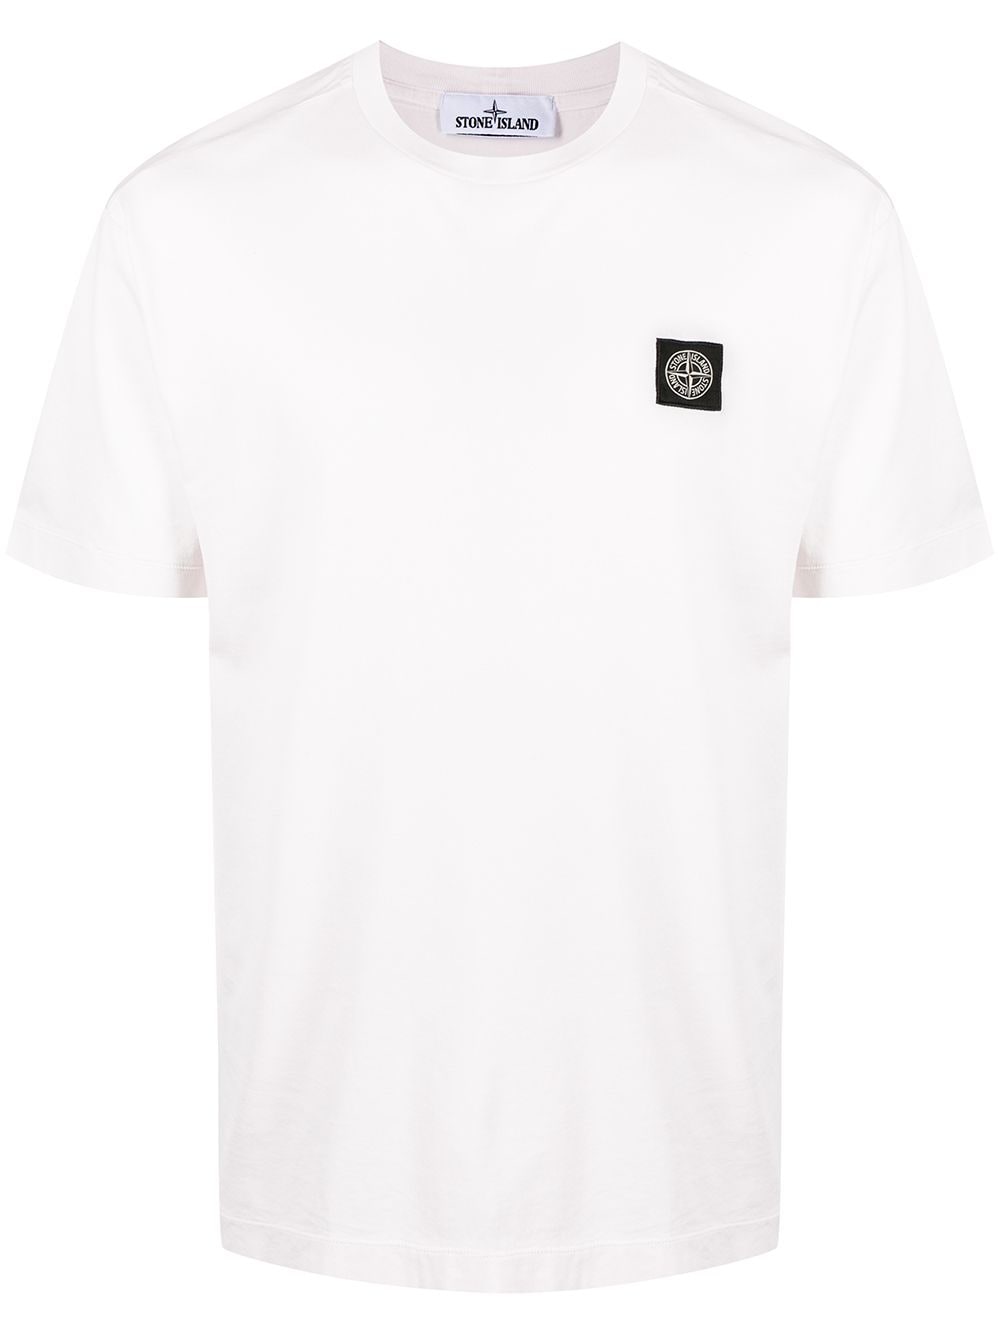 Shop Stone Island Compass-logo cotton T-shirt with Express Delivery ...